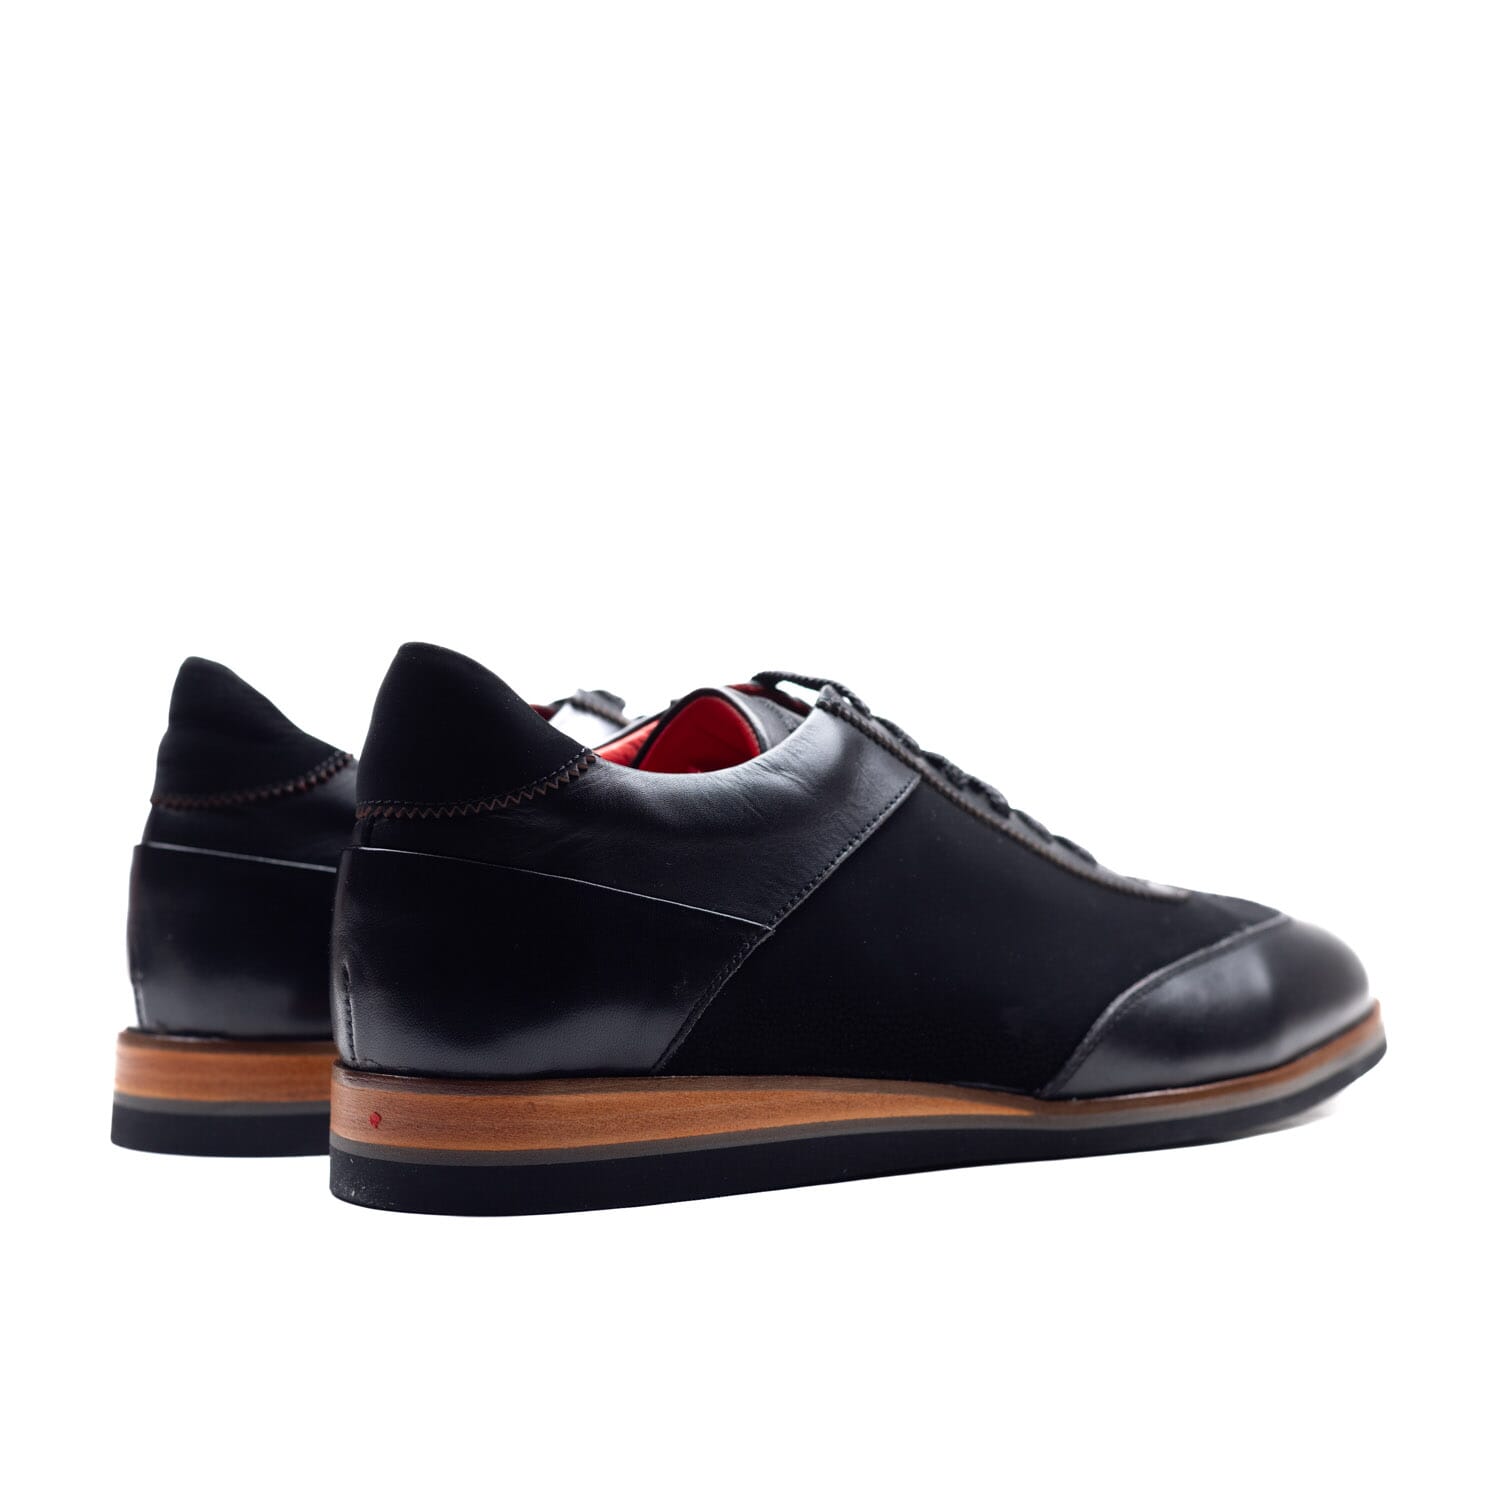 Formales – 4364 – Black – Perocili Shoes